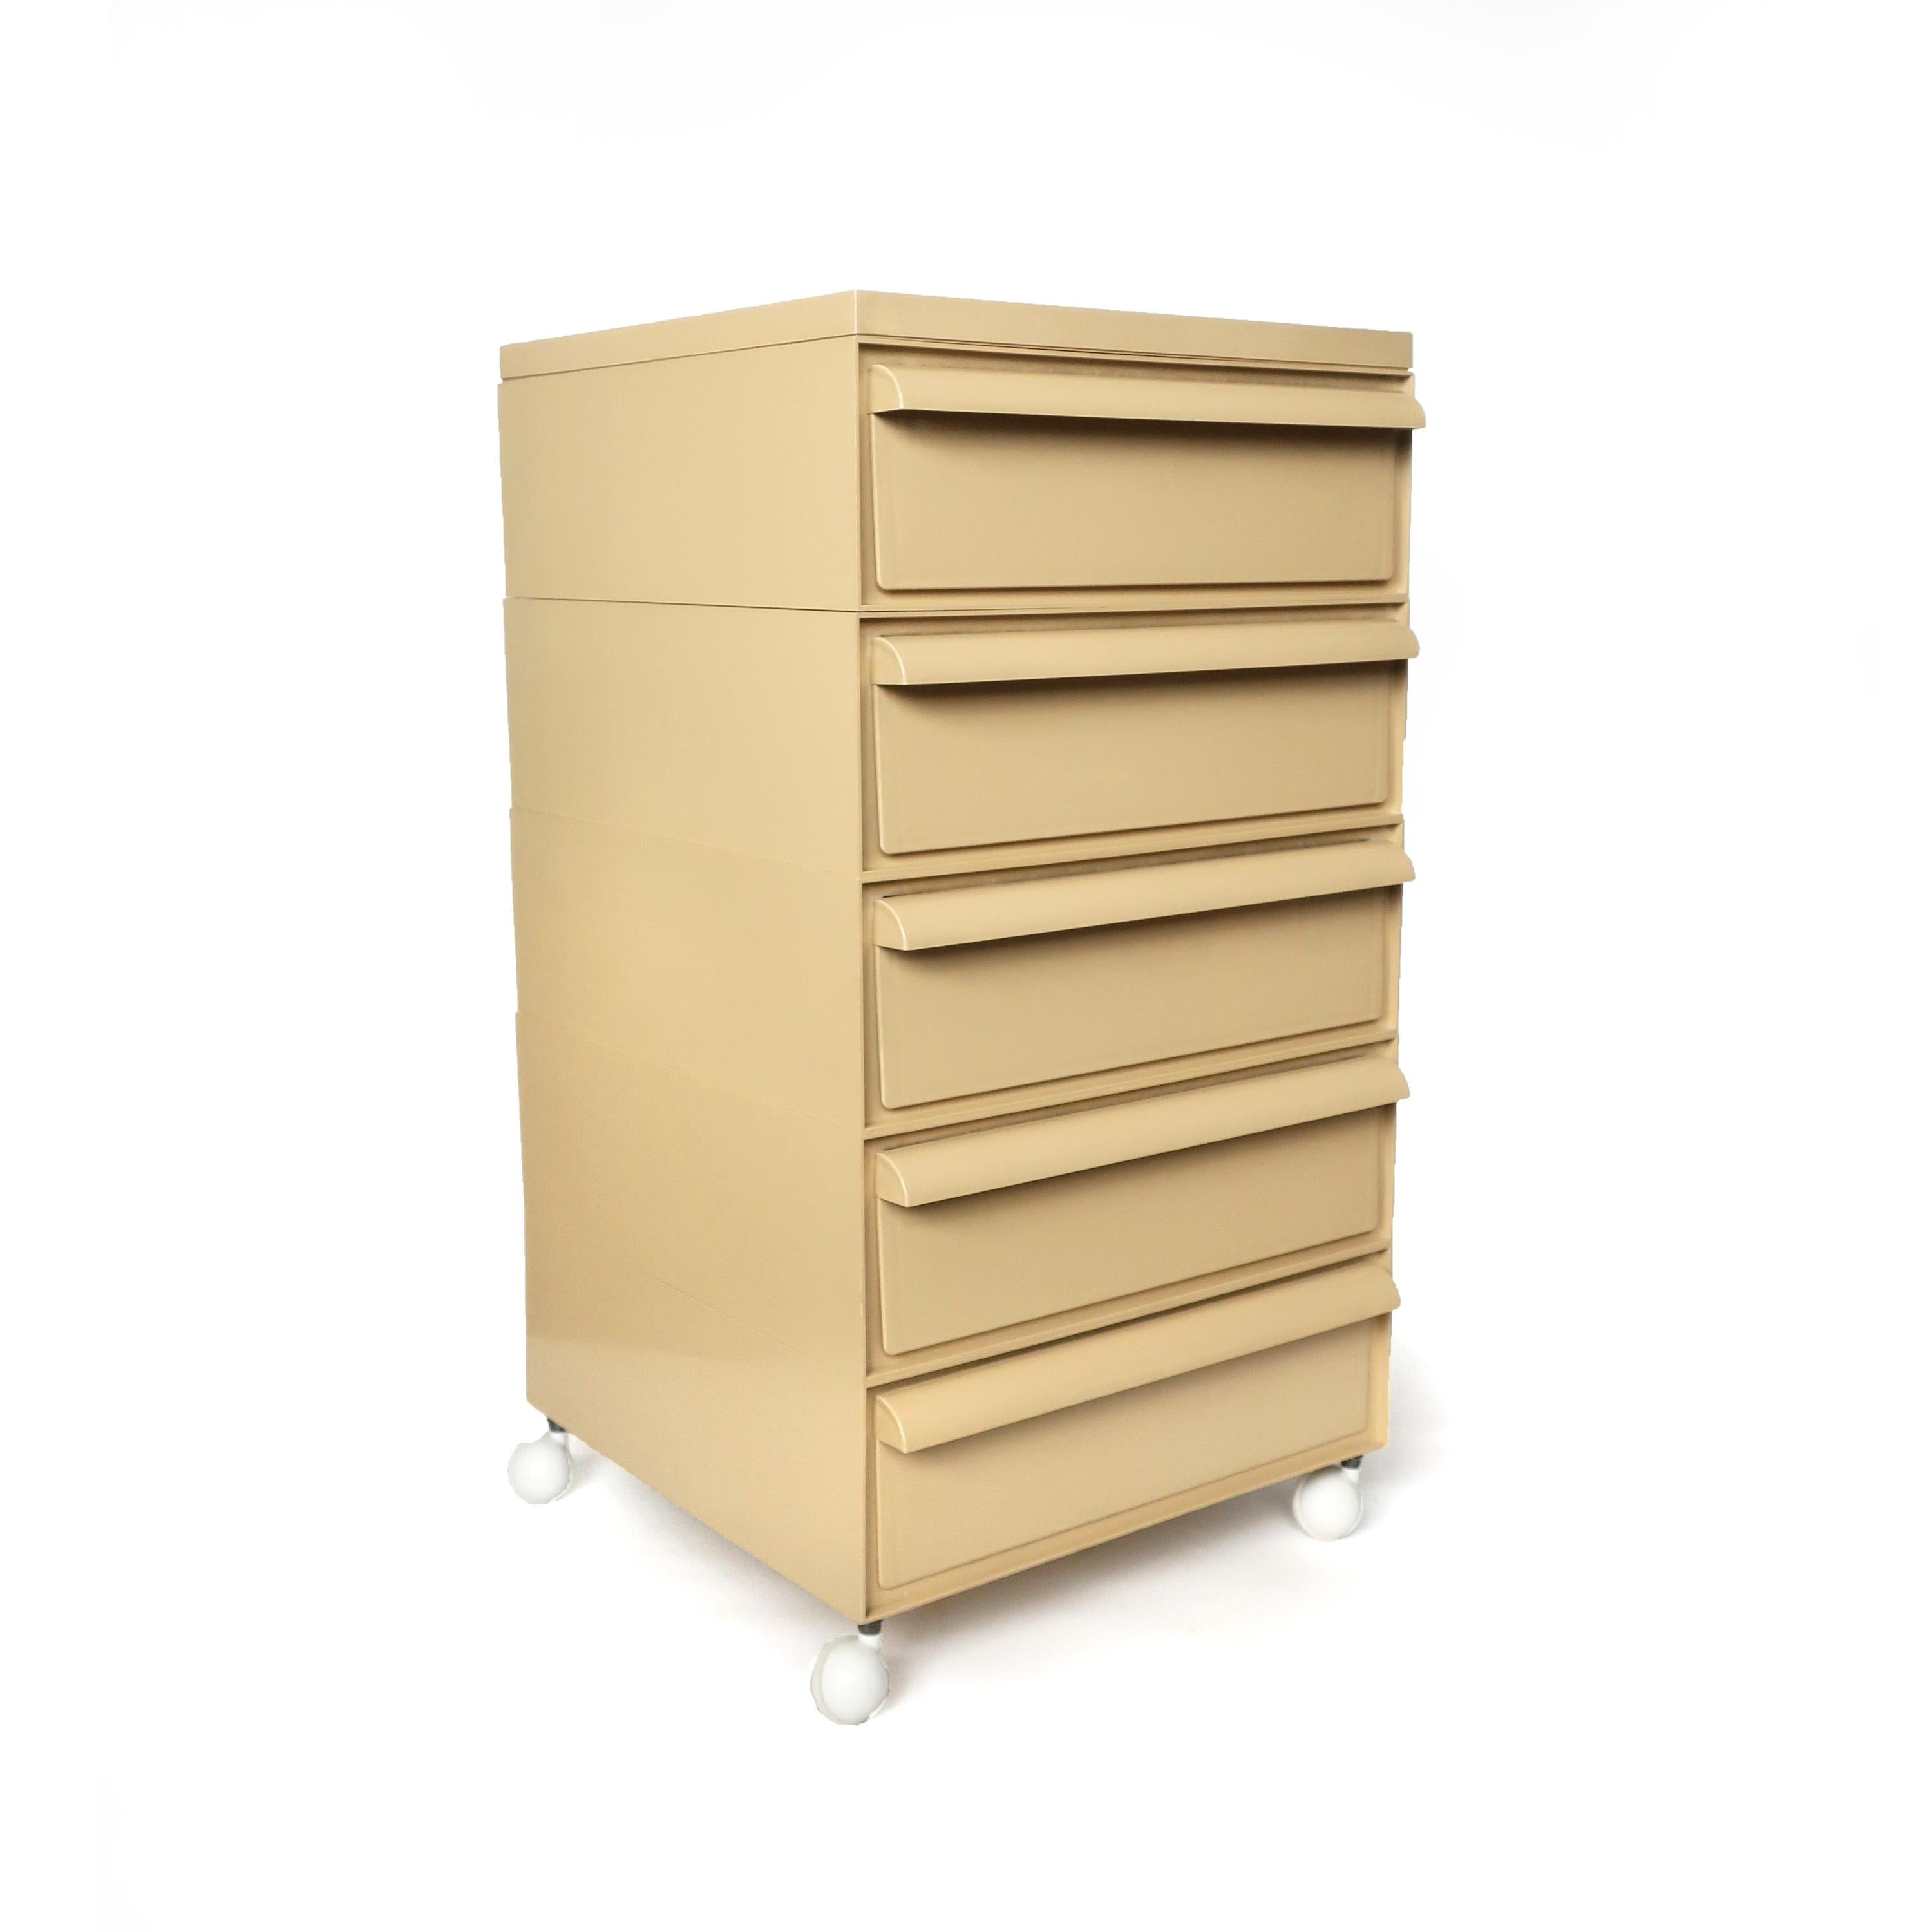 A vintage 1970s beige five drawer modular cabinet designed by Simon Fussell for Kartell’s Stacking Drawer Program storage line. Each drawer is square with a quarter-round pull. This system’s modularity allows for adding casters, stacking drawers as